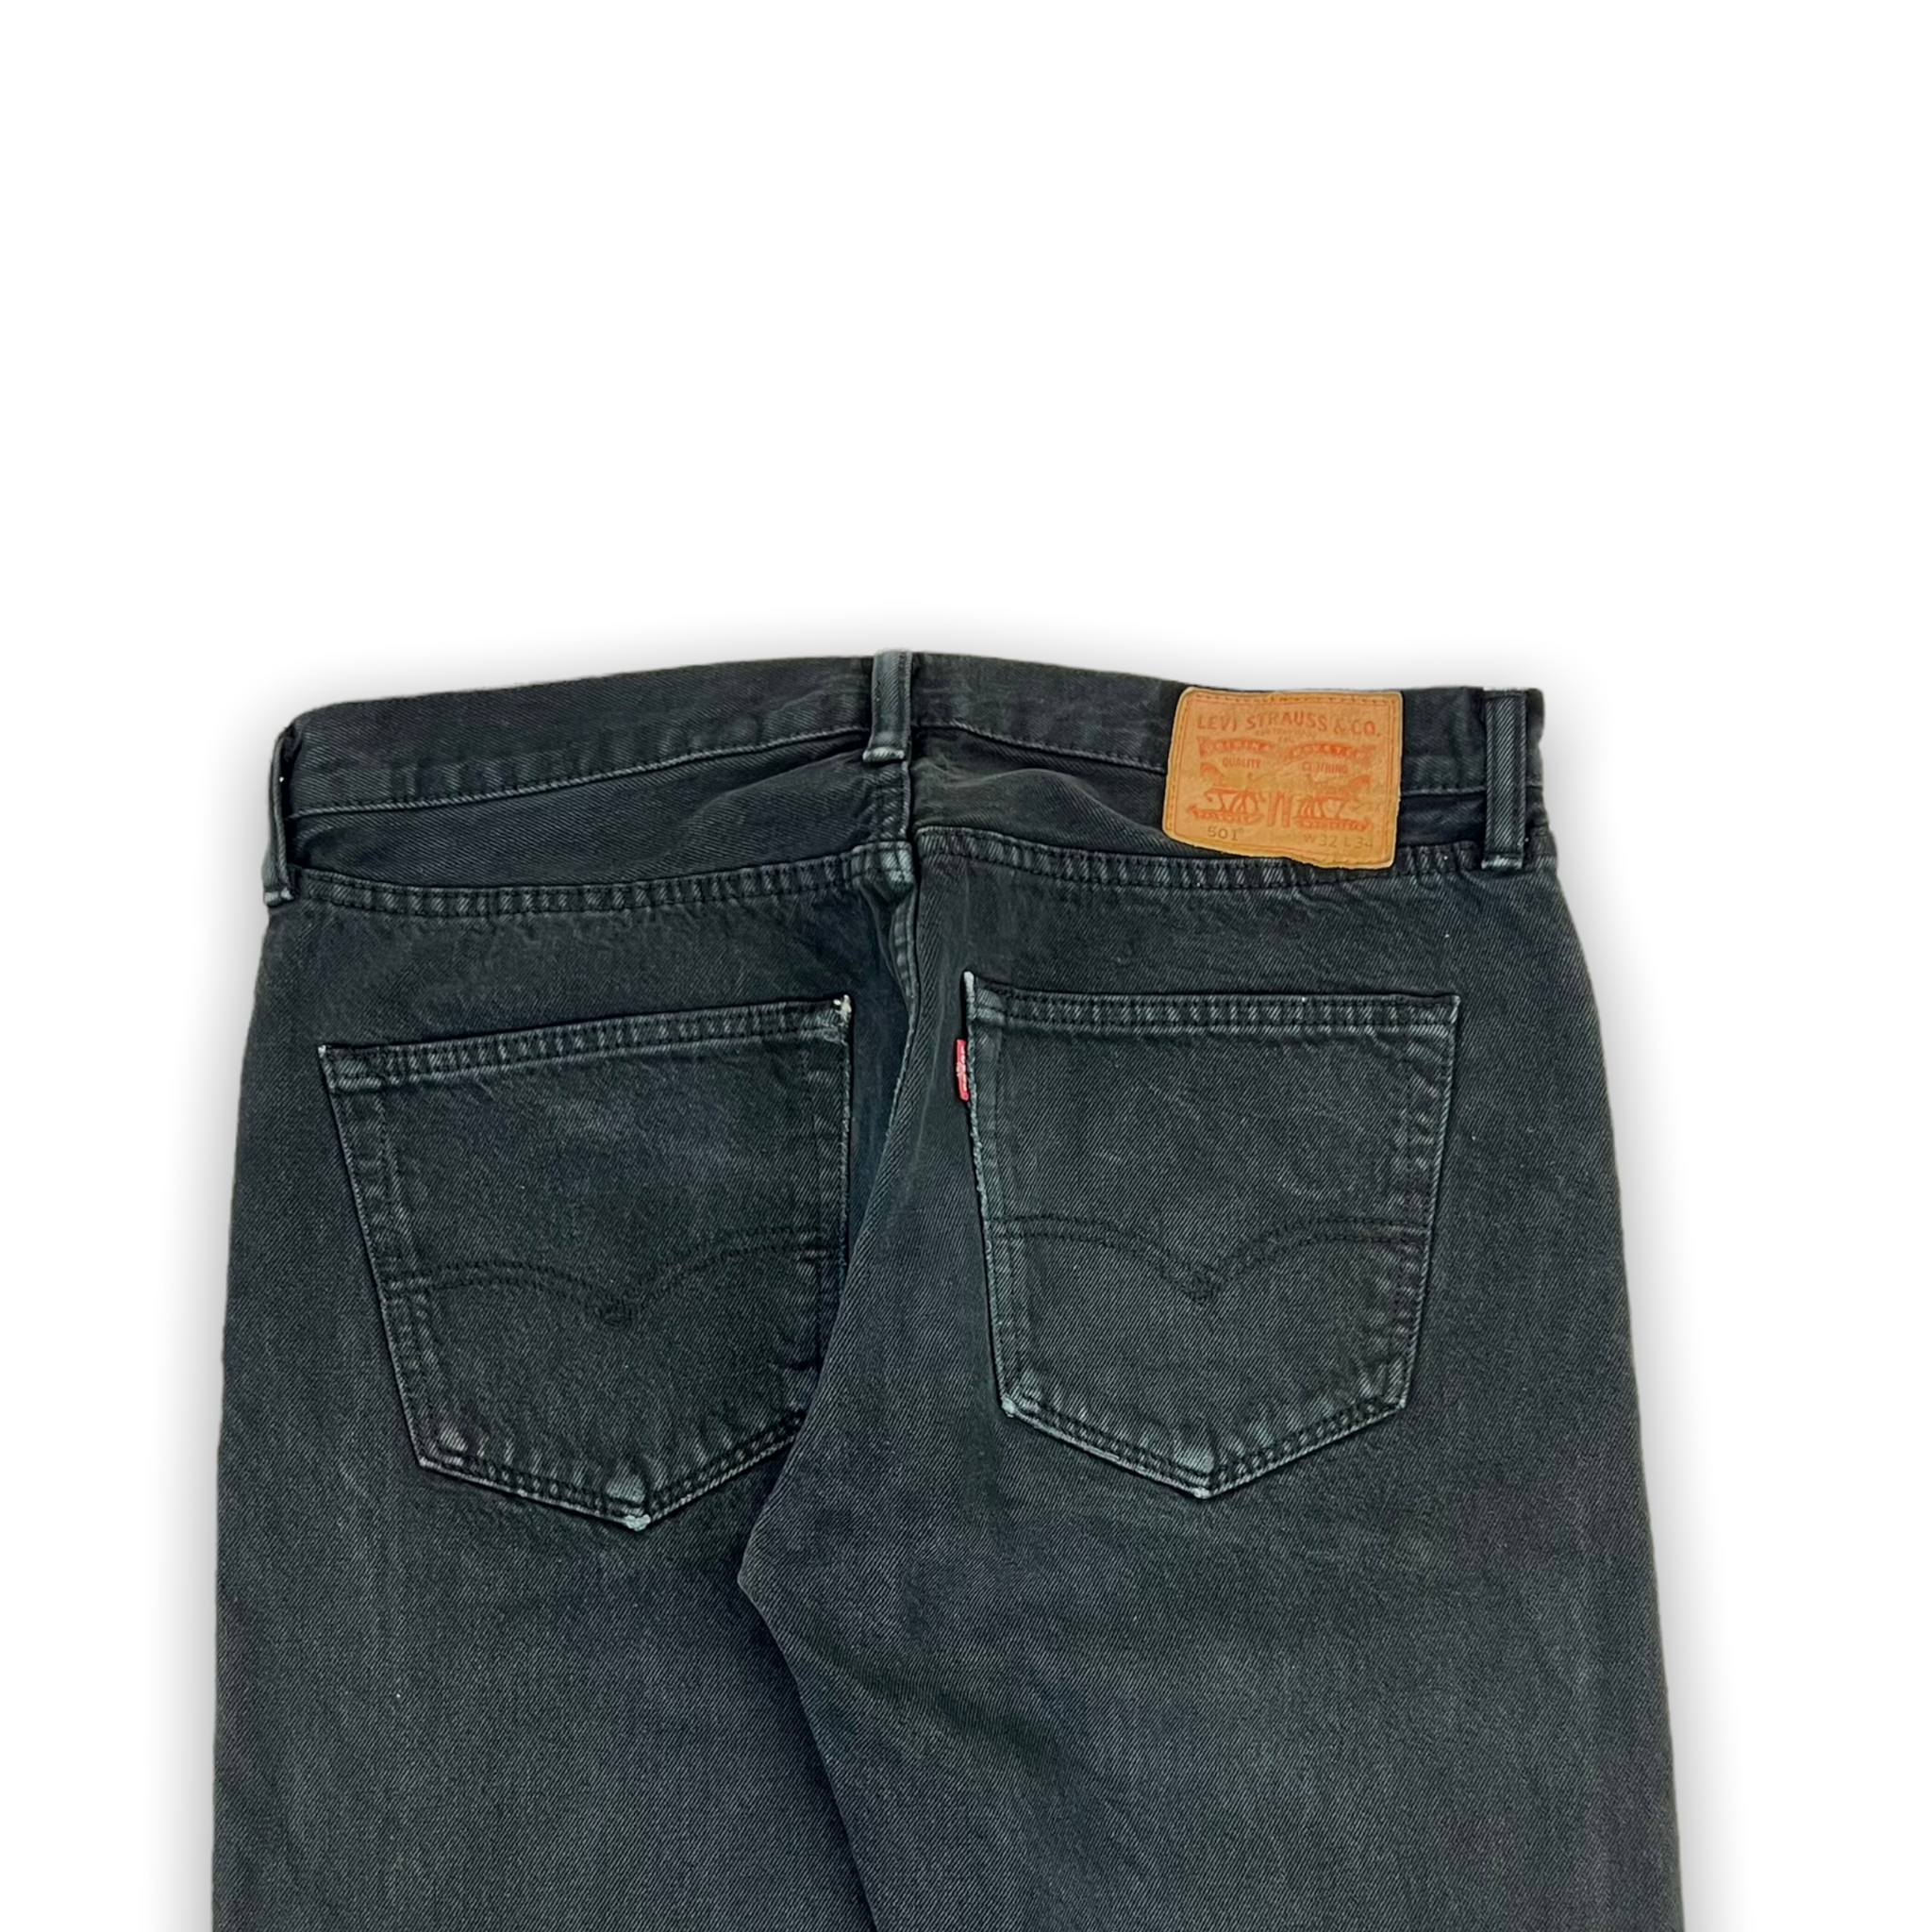 Levi's 501 Jeans size 33 – The Preloved Hype Store